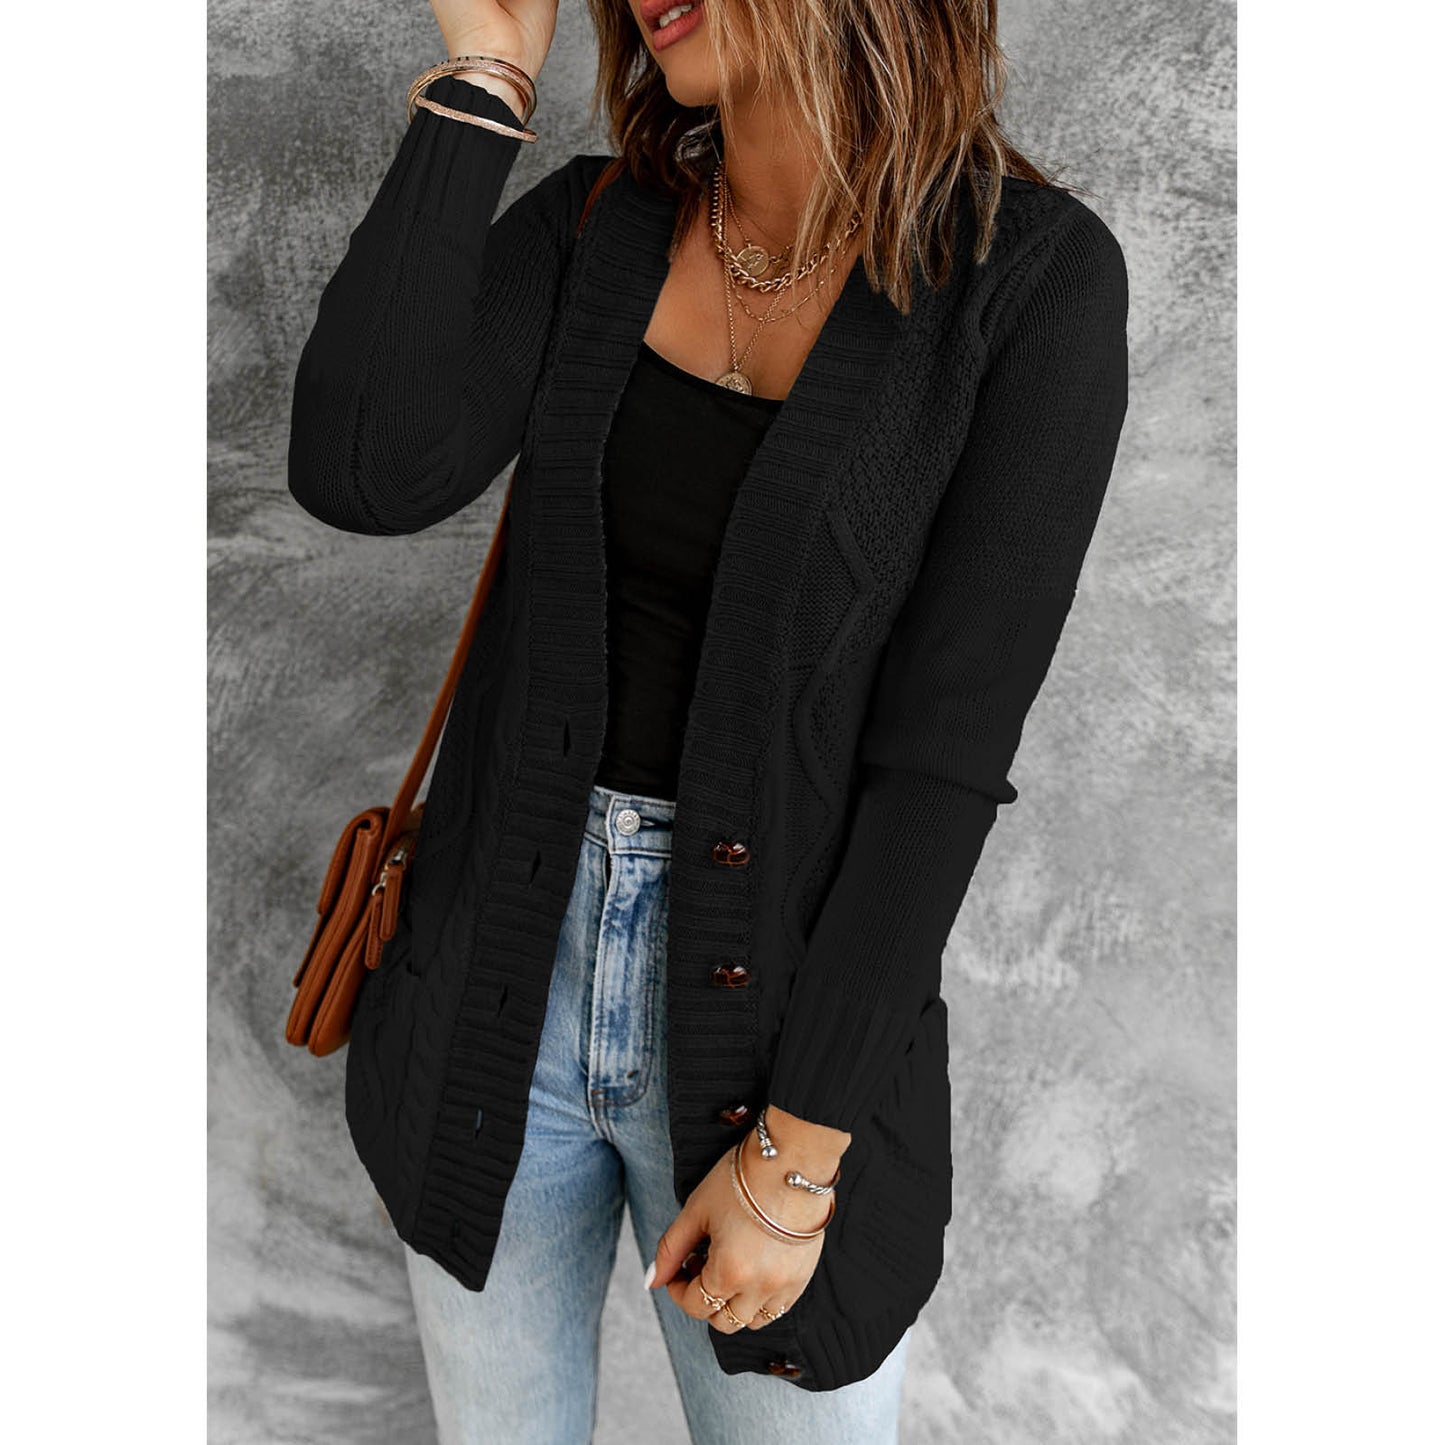 FRANKI CARDI WITH BUTTONS - BLACK: Mulholland Drive